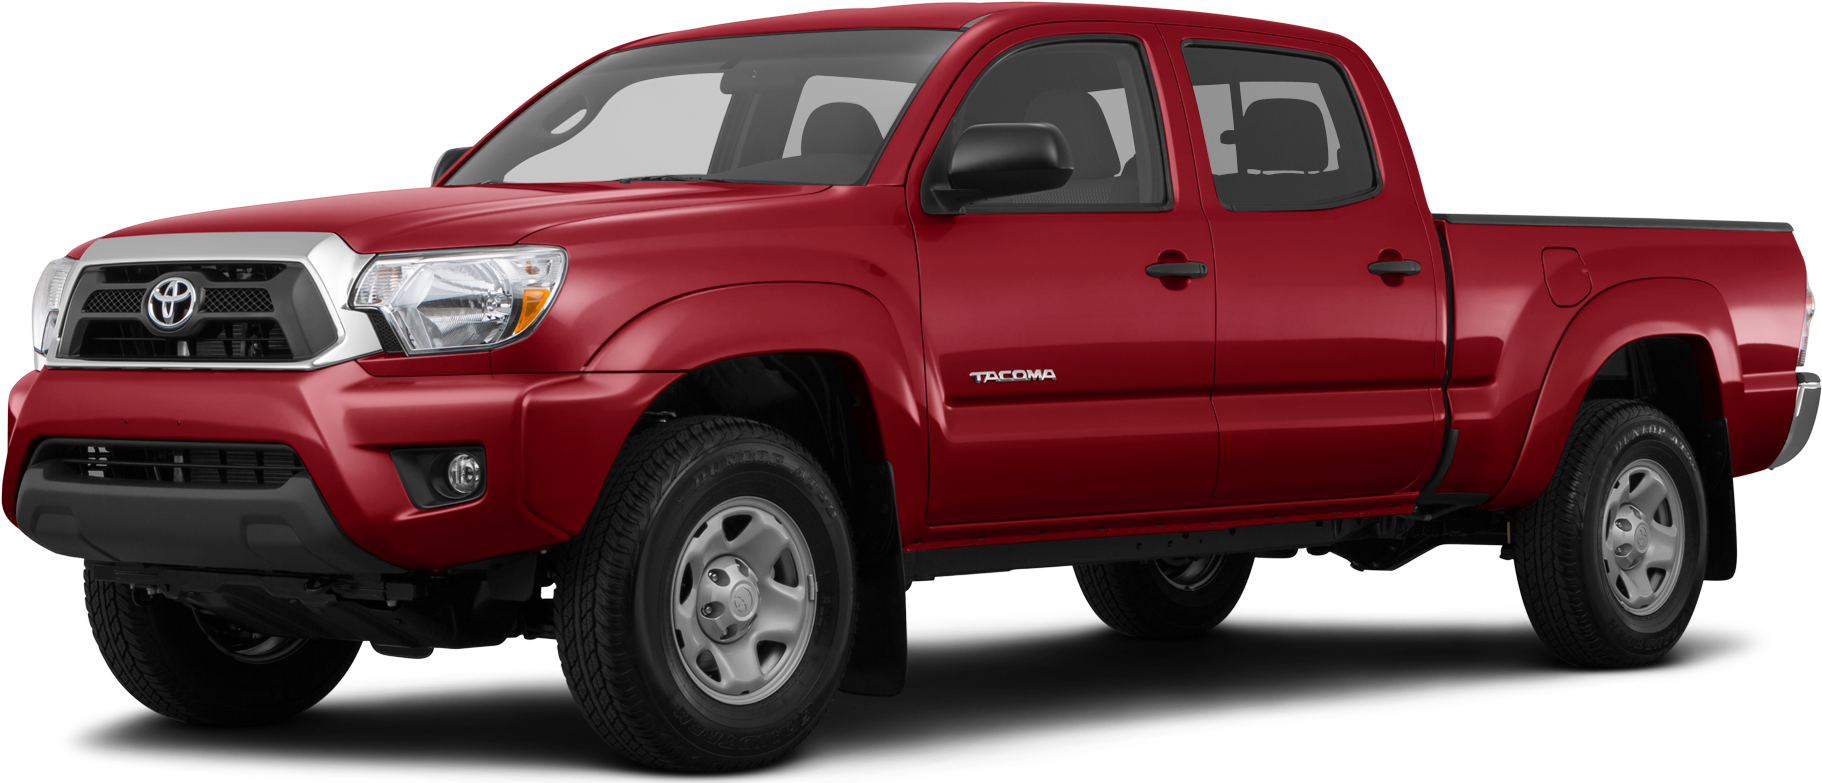 2015 Toyota Double Cab Price, Value, Ratings & Reviews Kelley